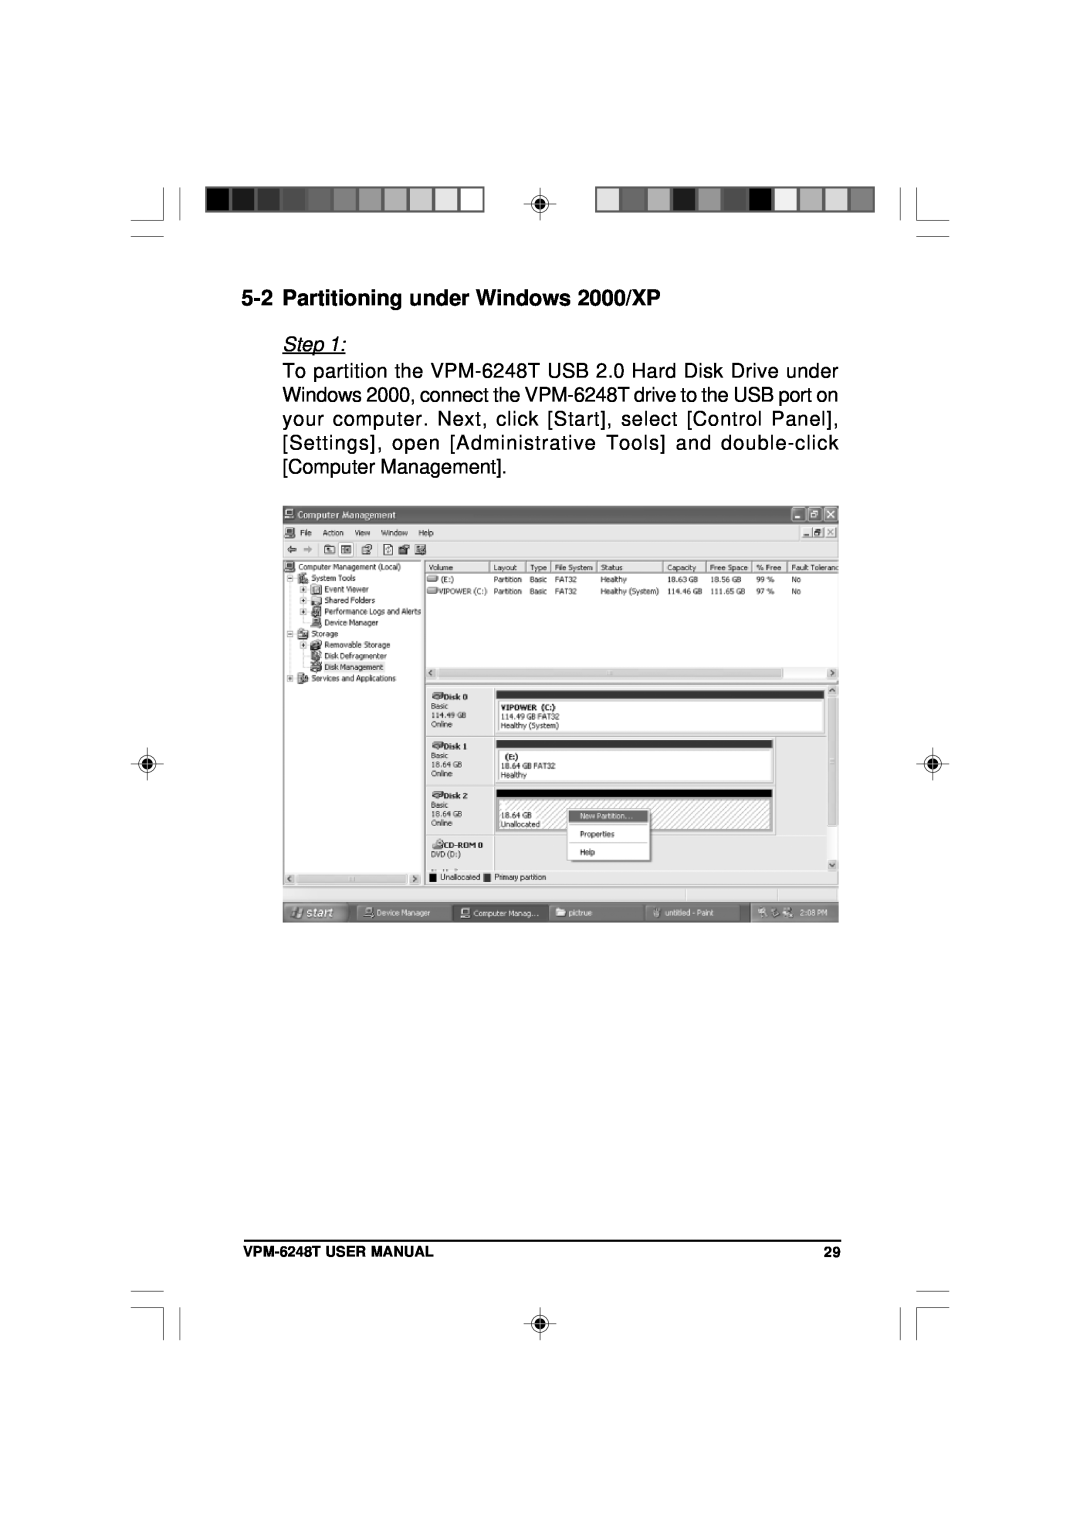 VIPowER VPM-6248T user manual Partitioning under Windows 2000/XP, Step 